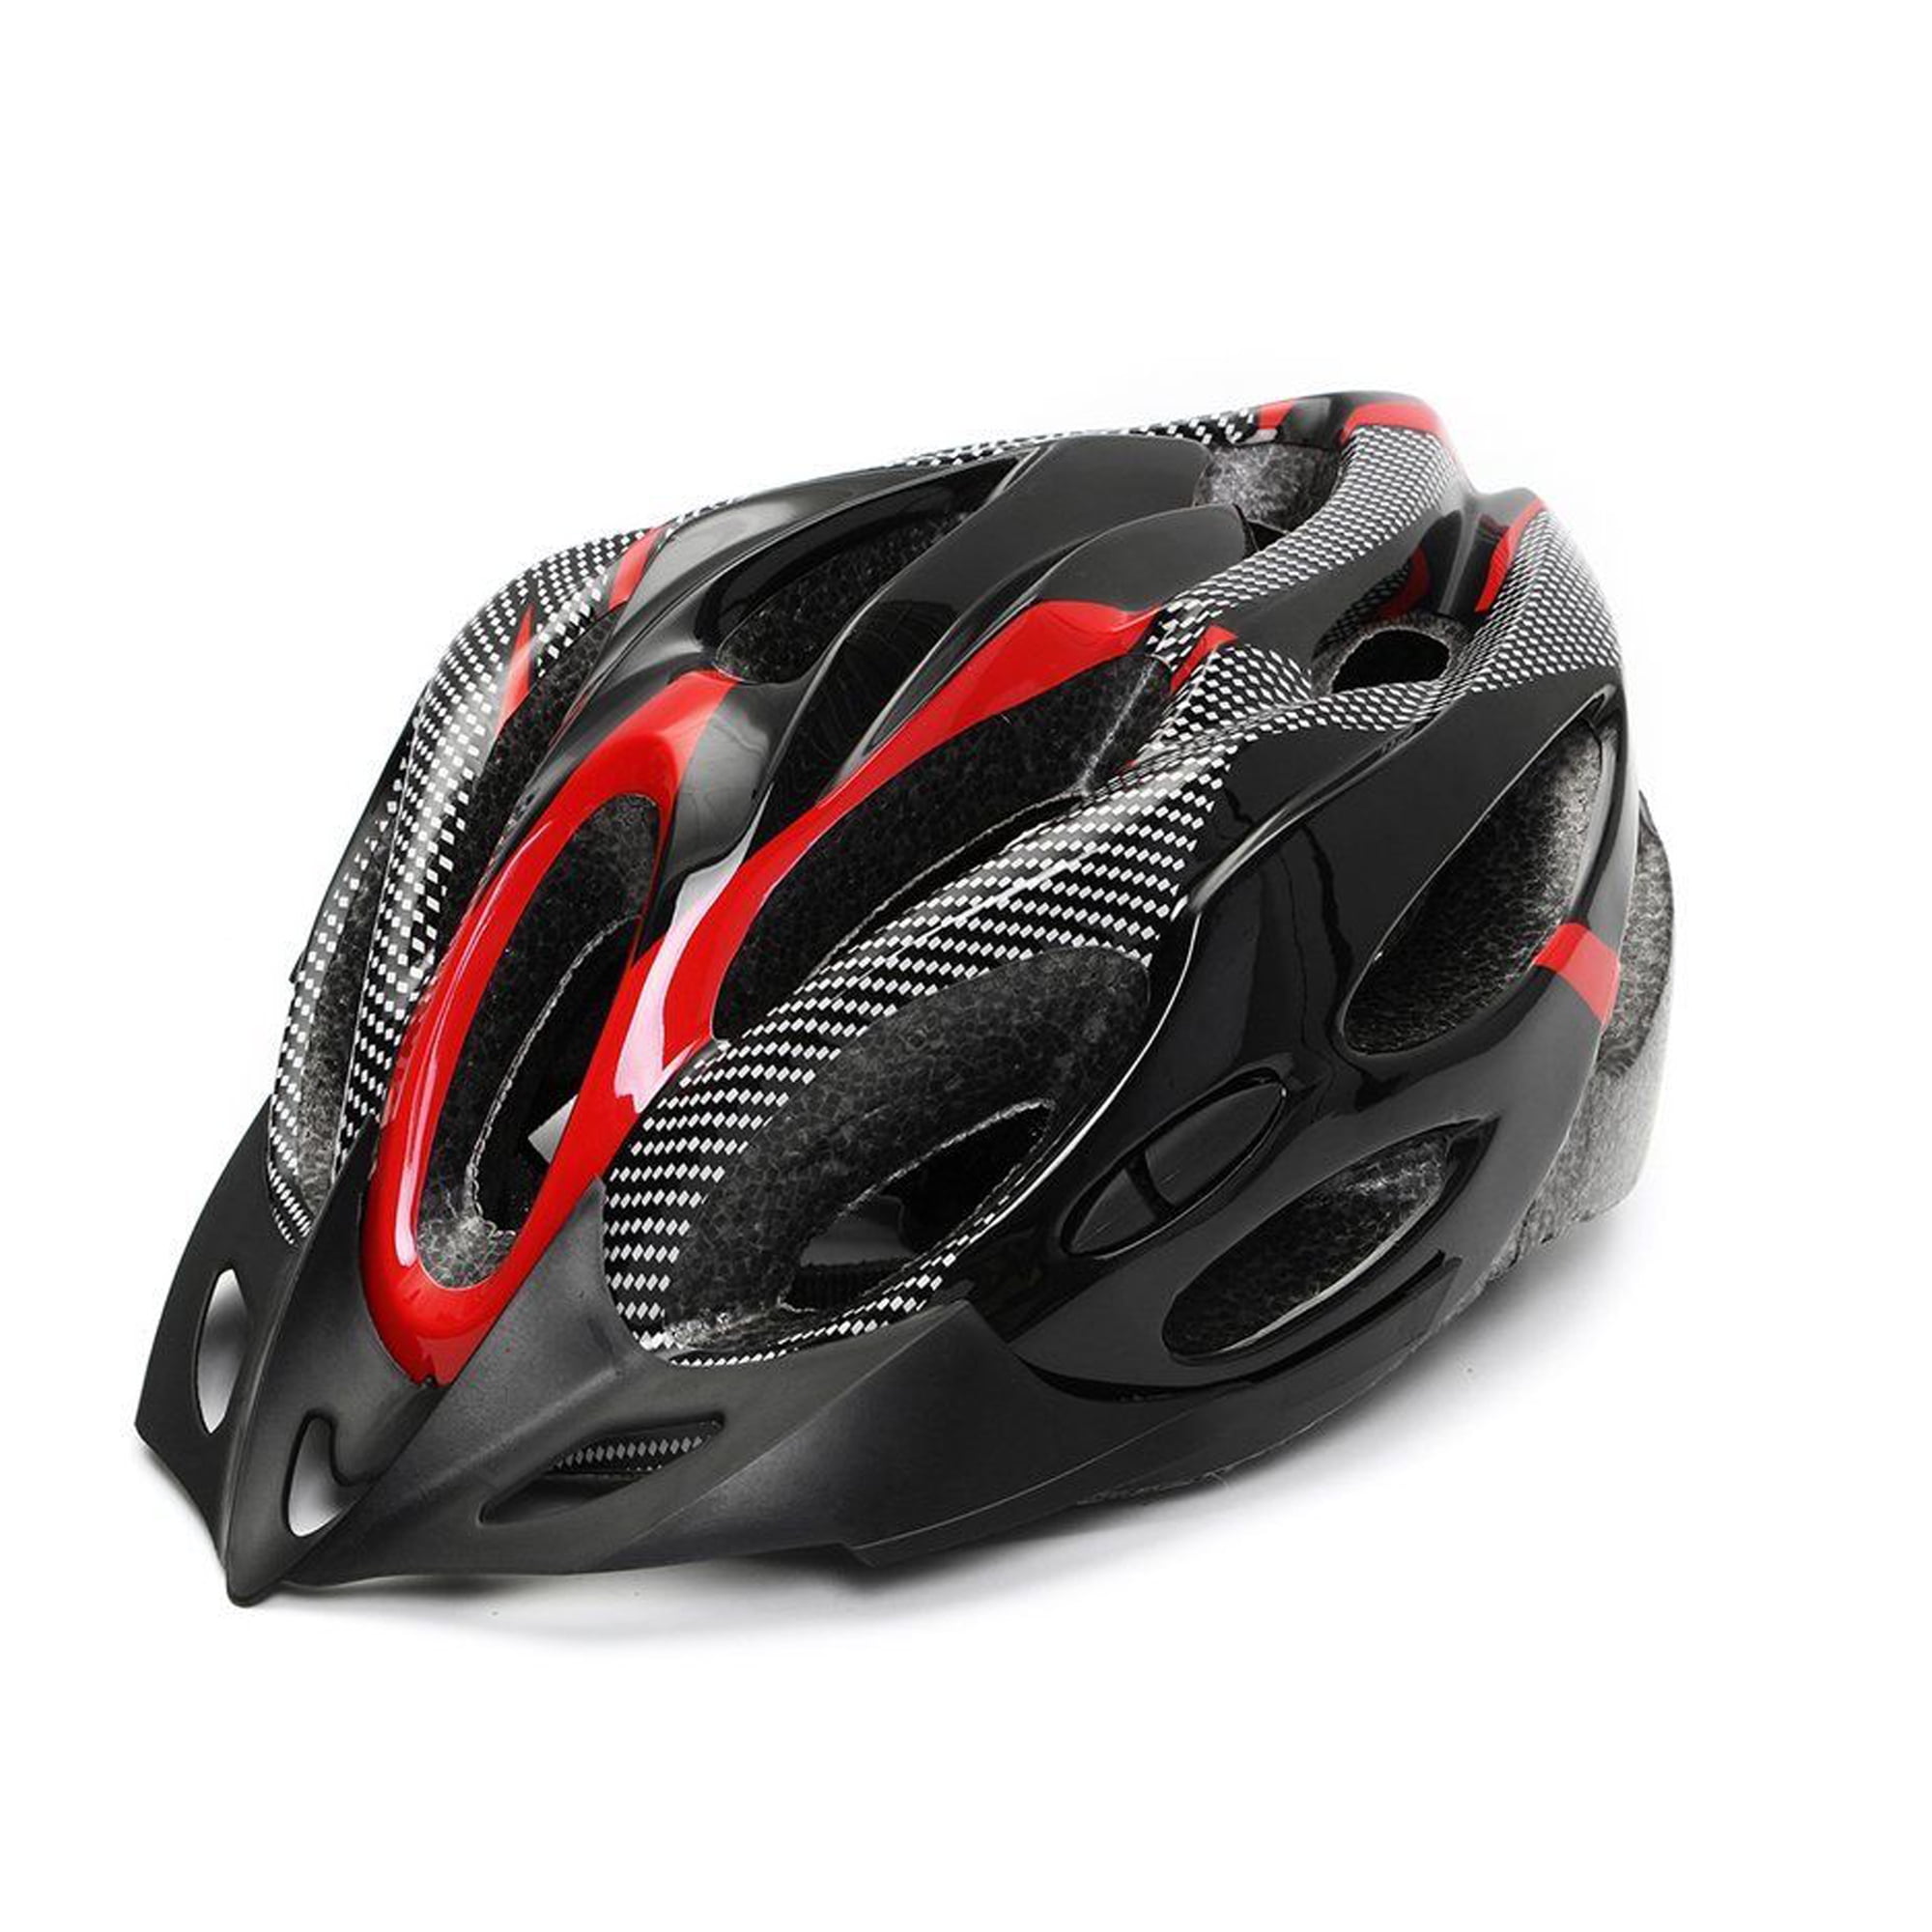 MTB Road Bike Bicycle Helmet Cycling Mountain Cycling Adult Sports Safety Helmet 